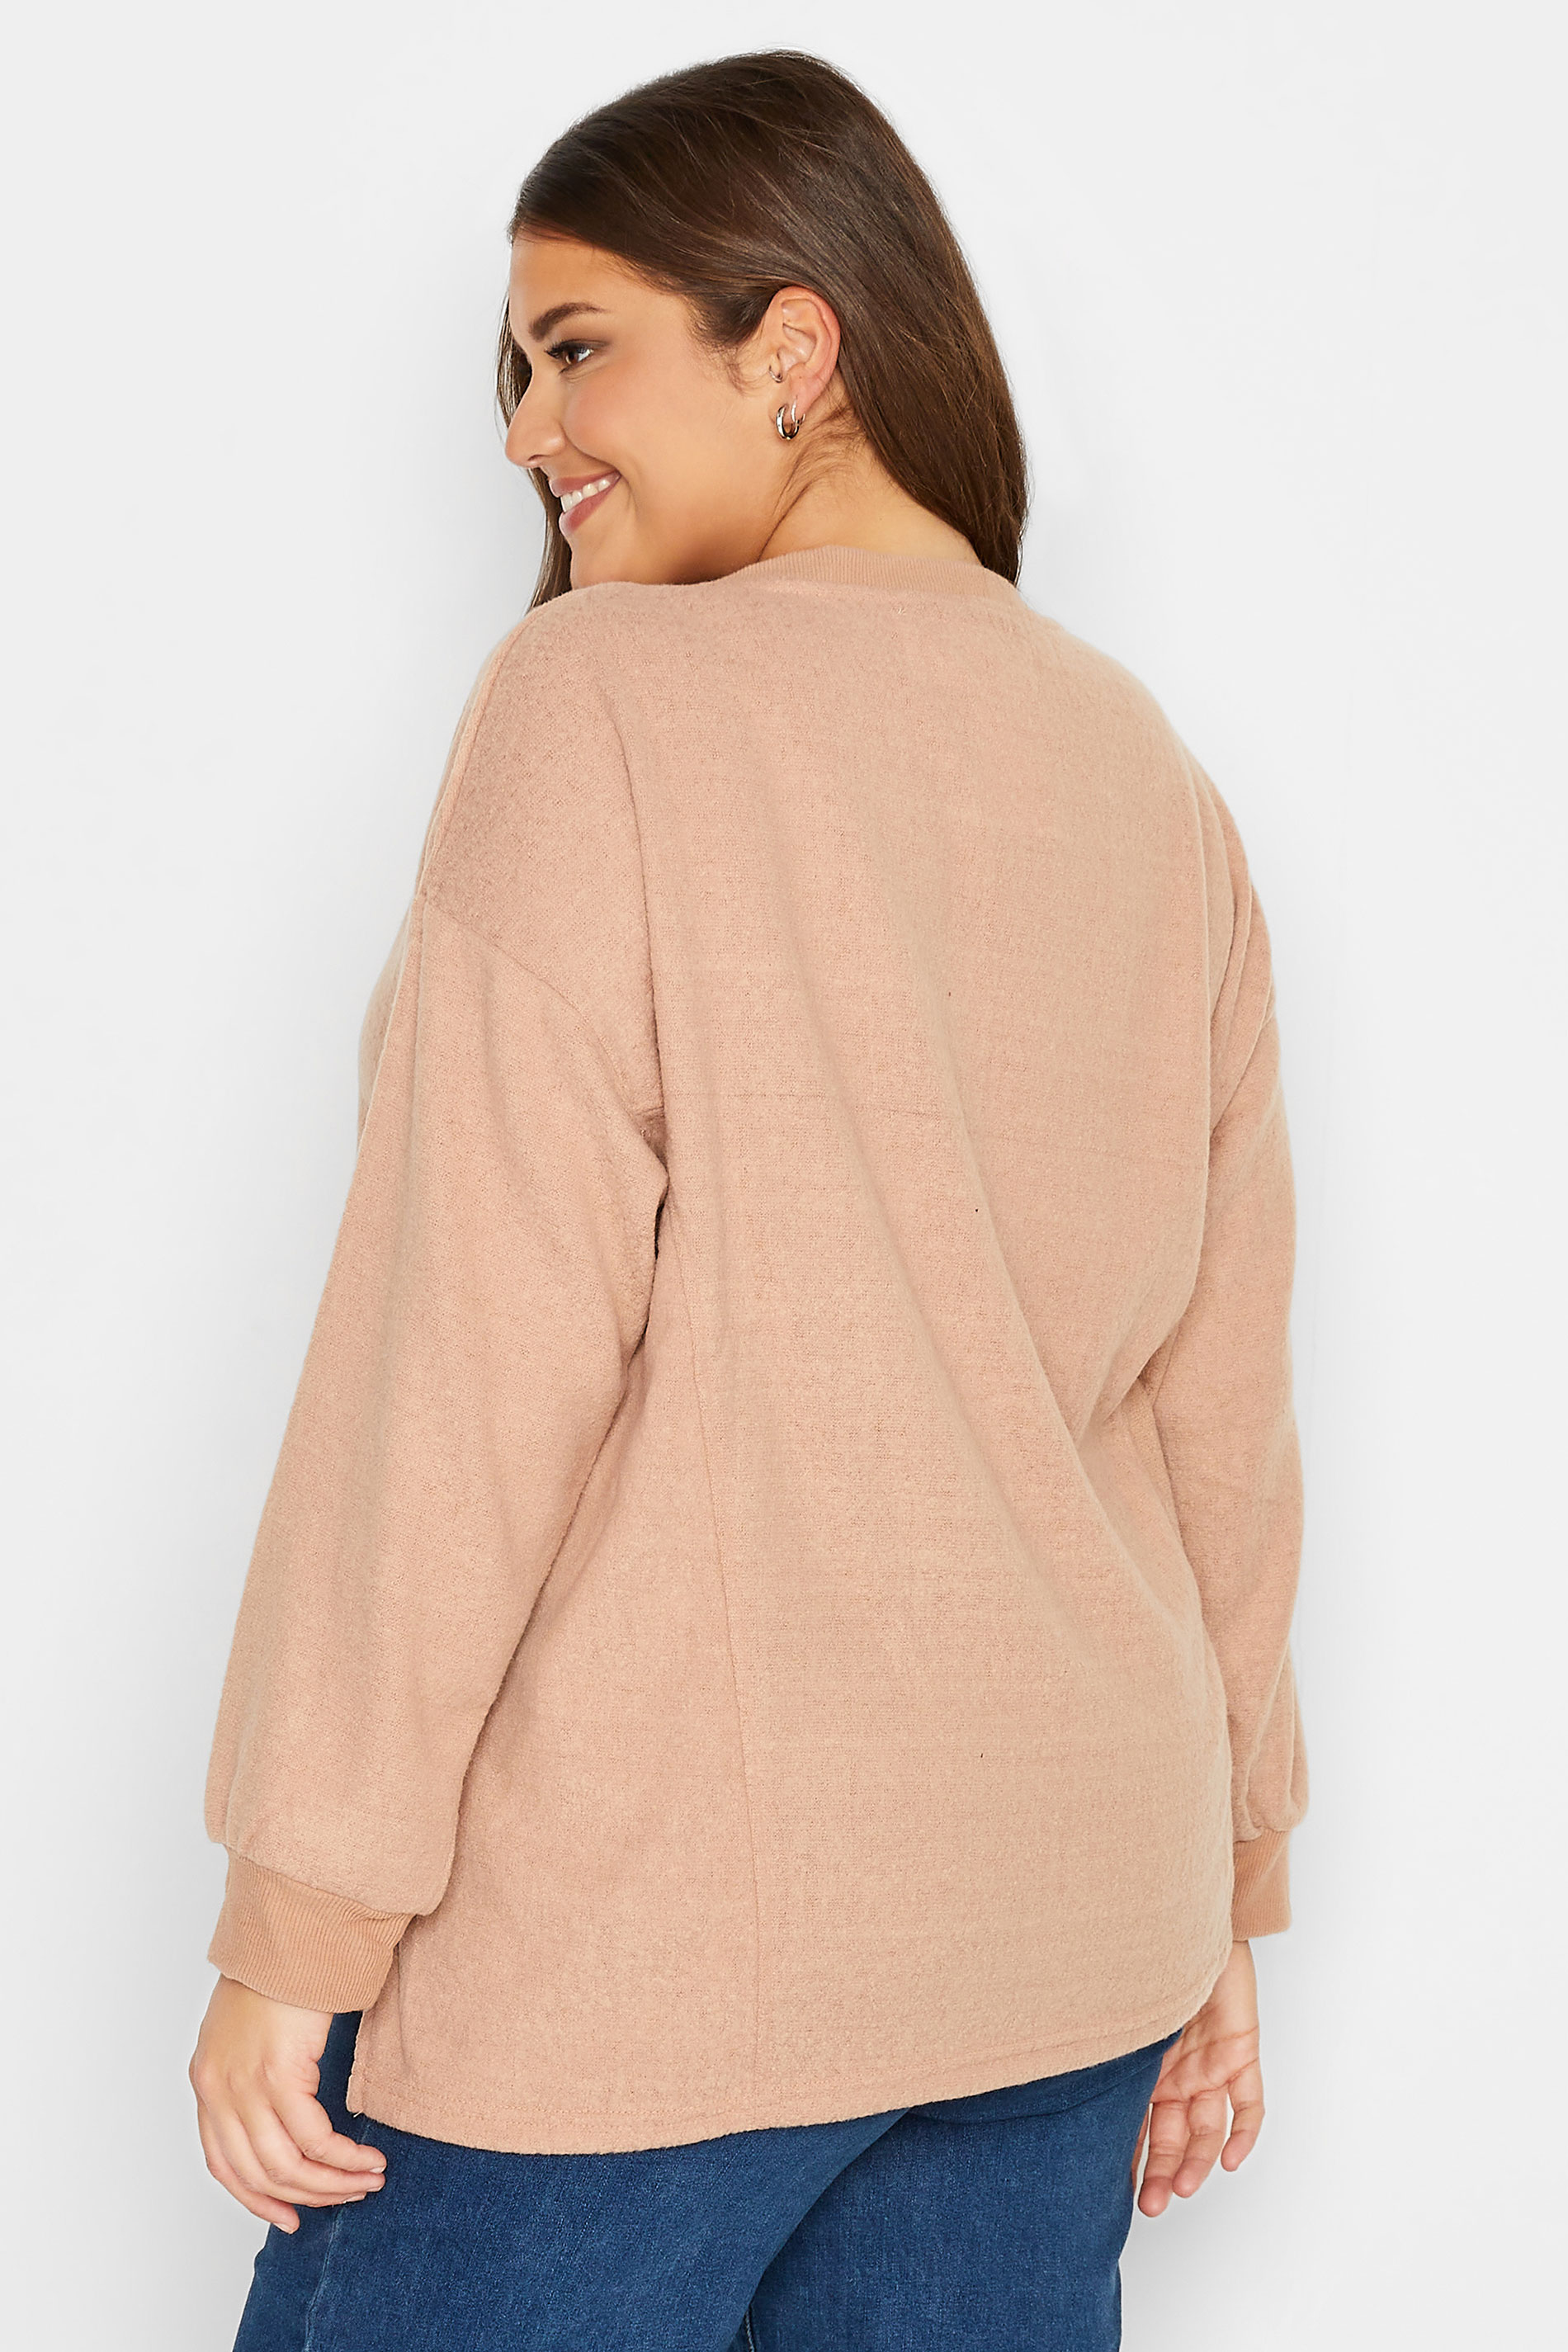 Plus Size Beige Brown V-Neck Soft Touch Fleece Sweatshirt | Yours Clothing 3